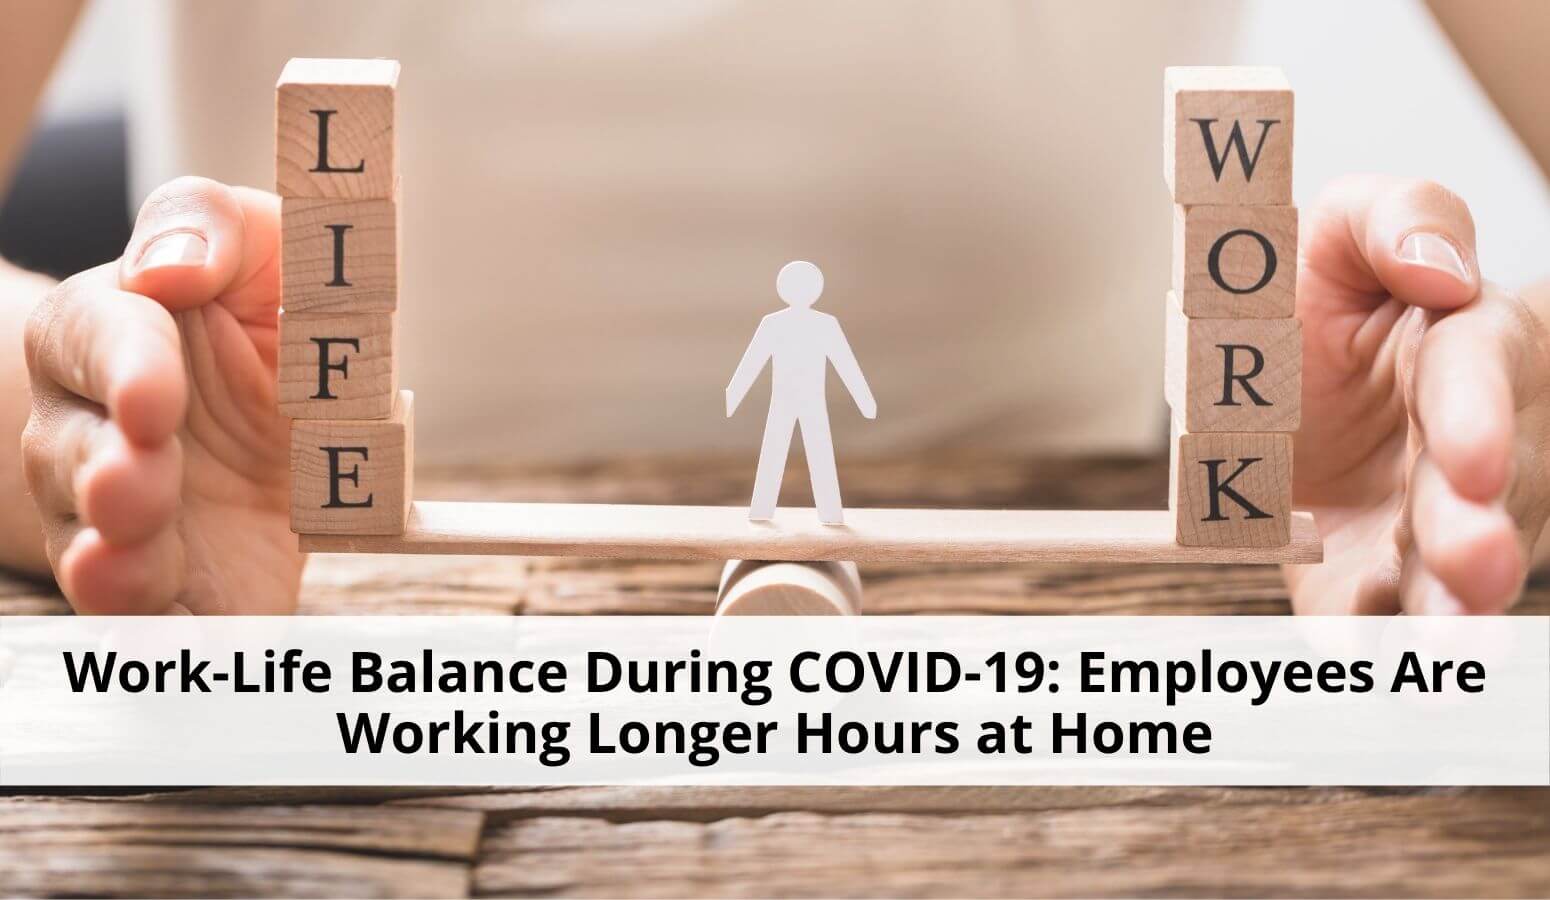 Featured image for “Work Life Balance During COVID-19: Employees Are Working Longer Hours at Home”